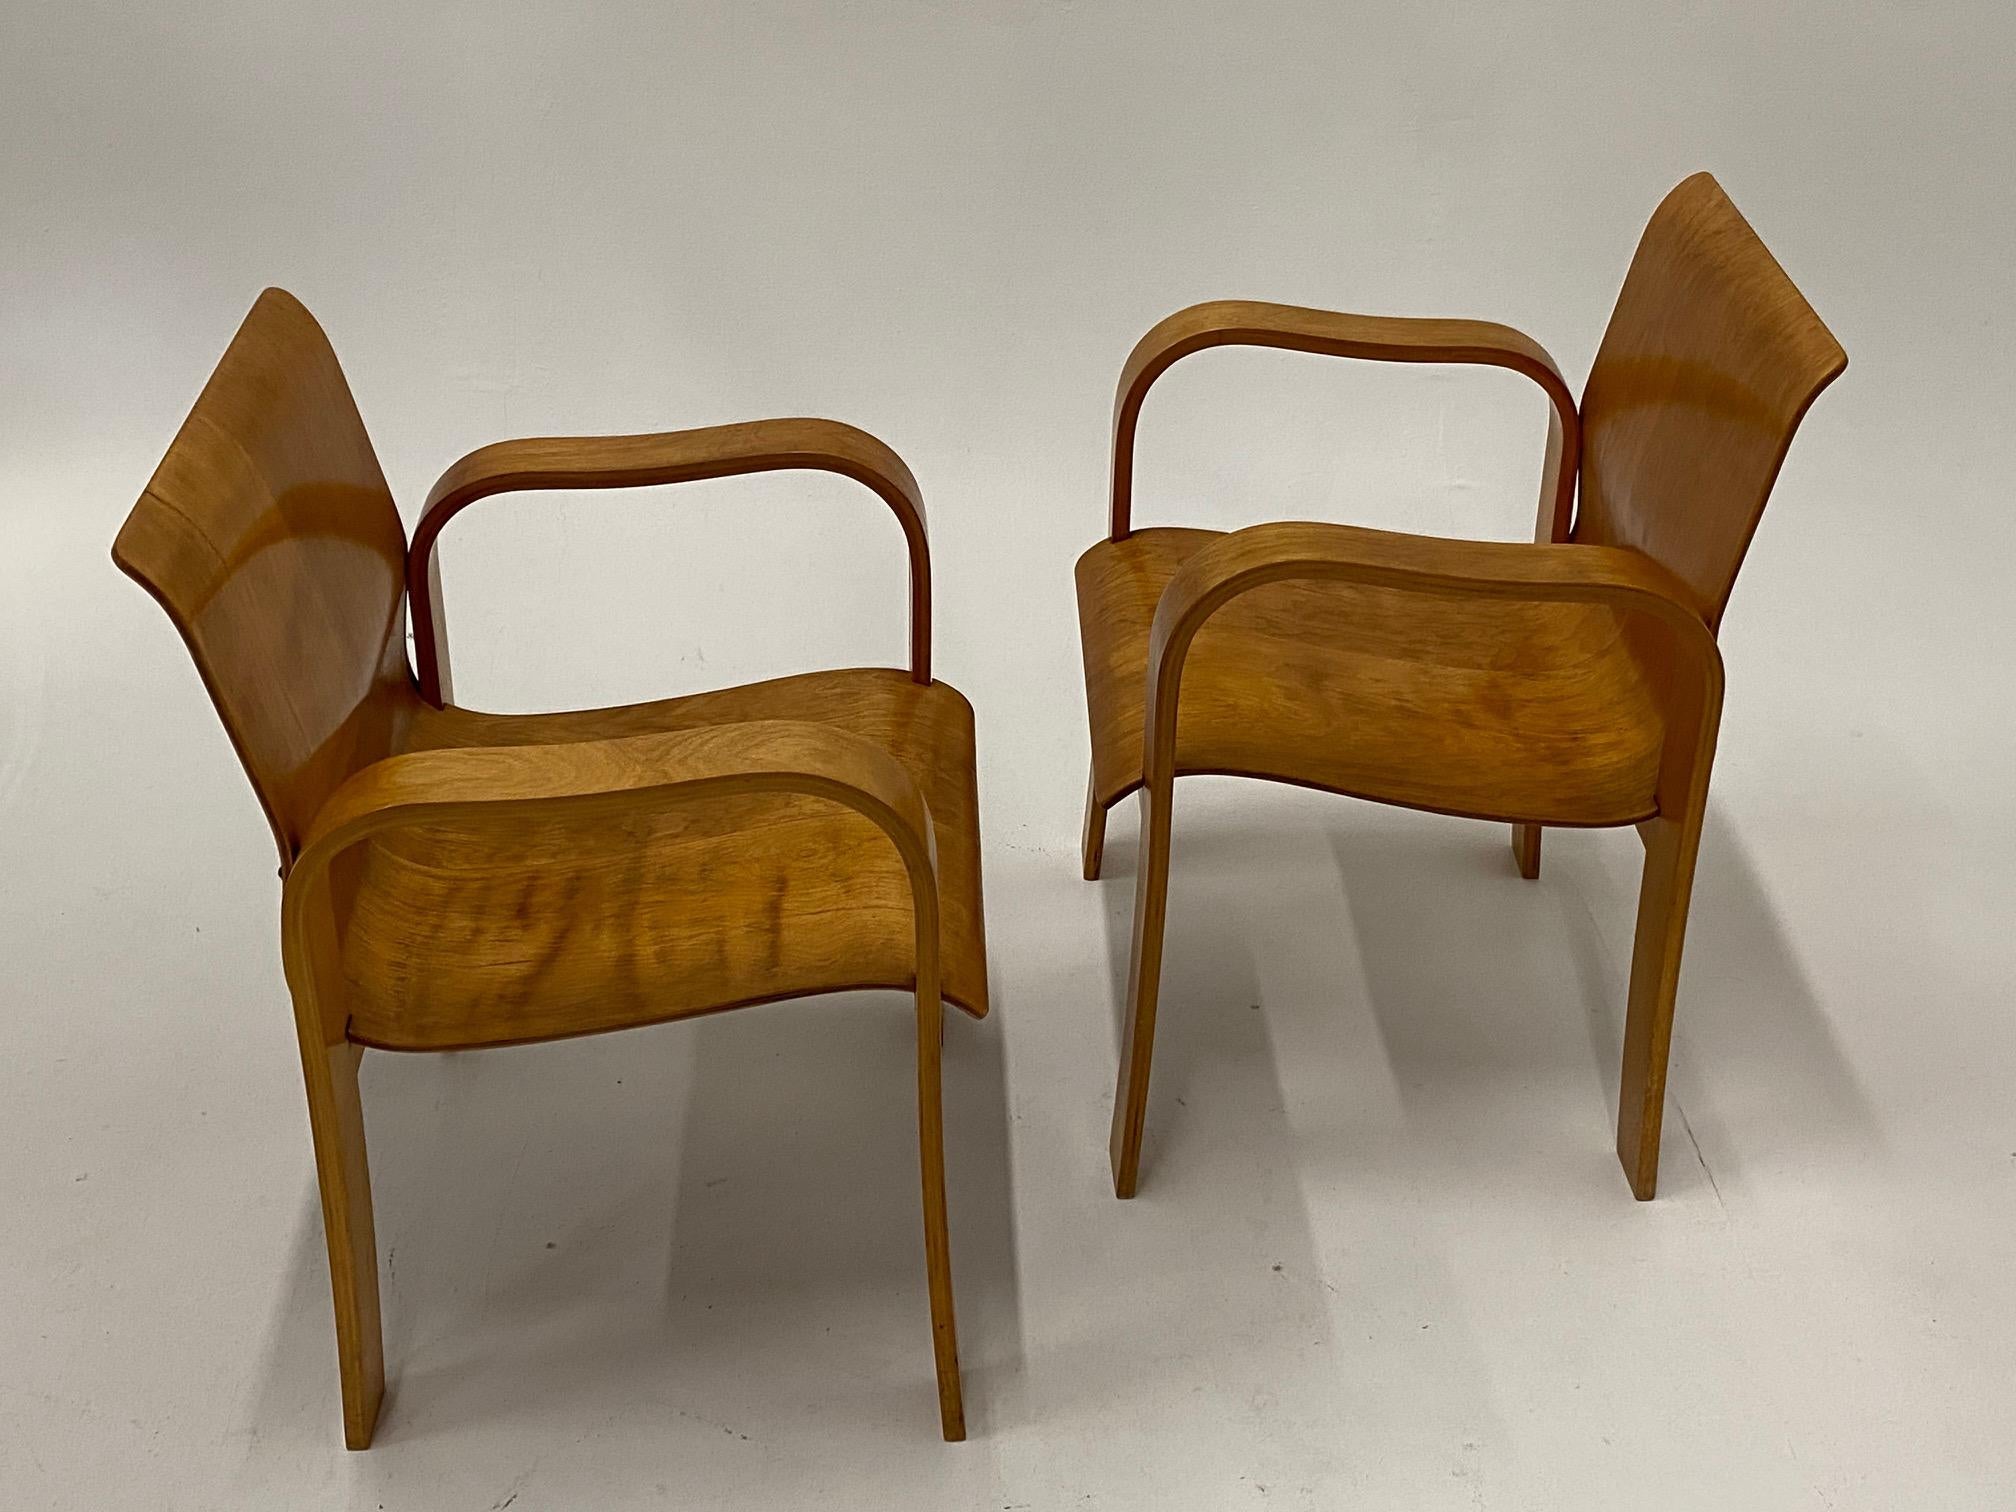 Rare Pair of Sleek Molded Plywood Mid-Century Modern Armchairs For Sale 5